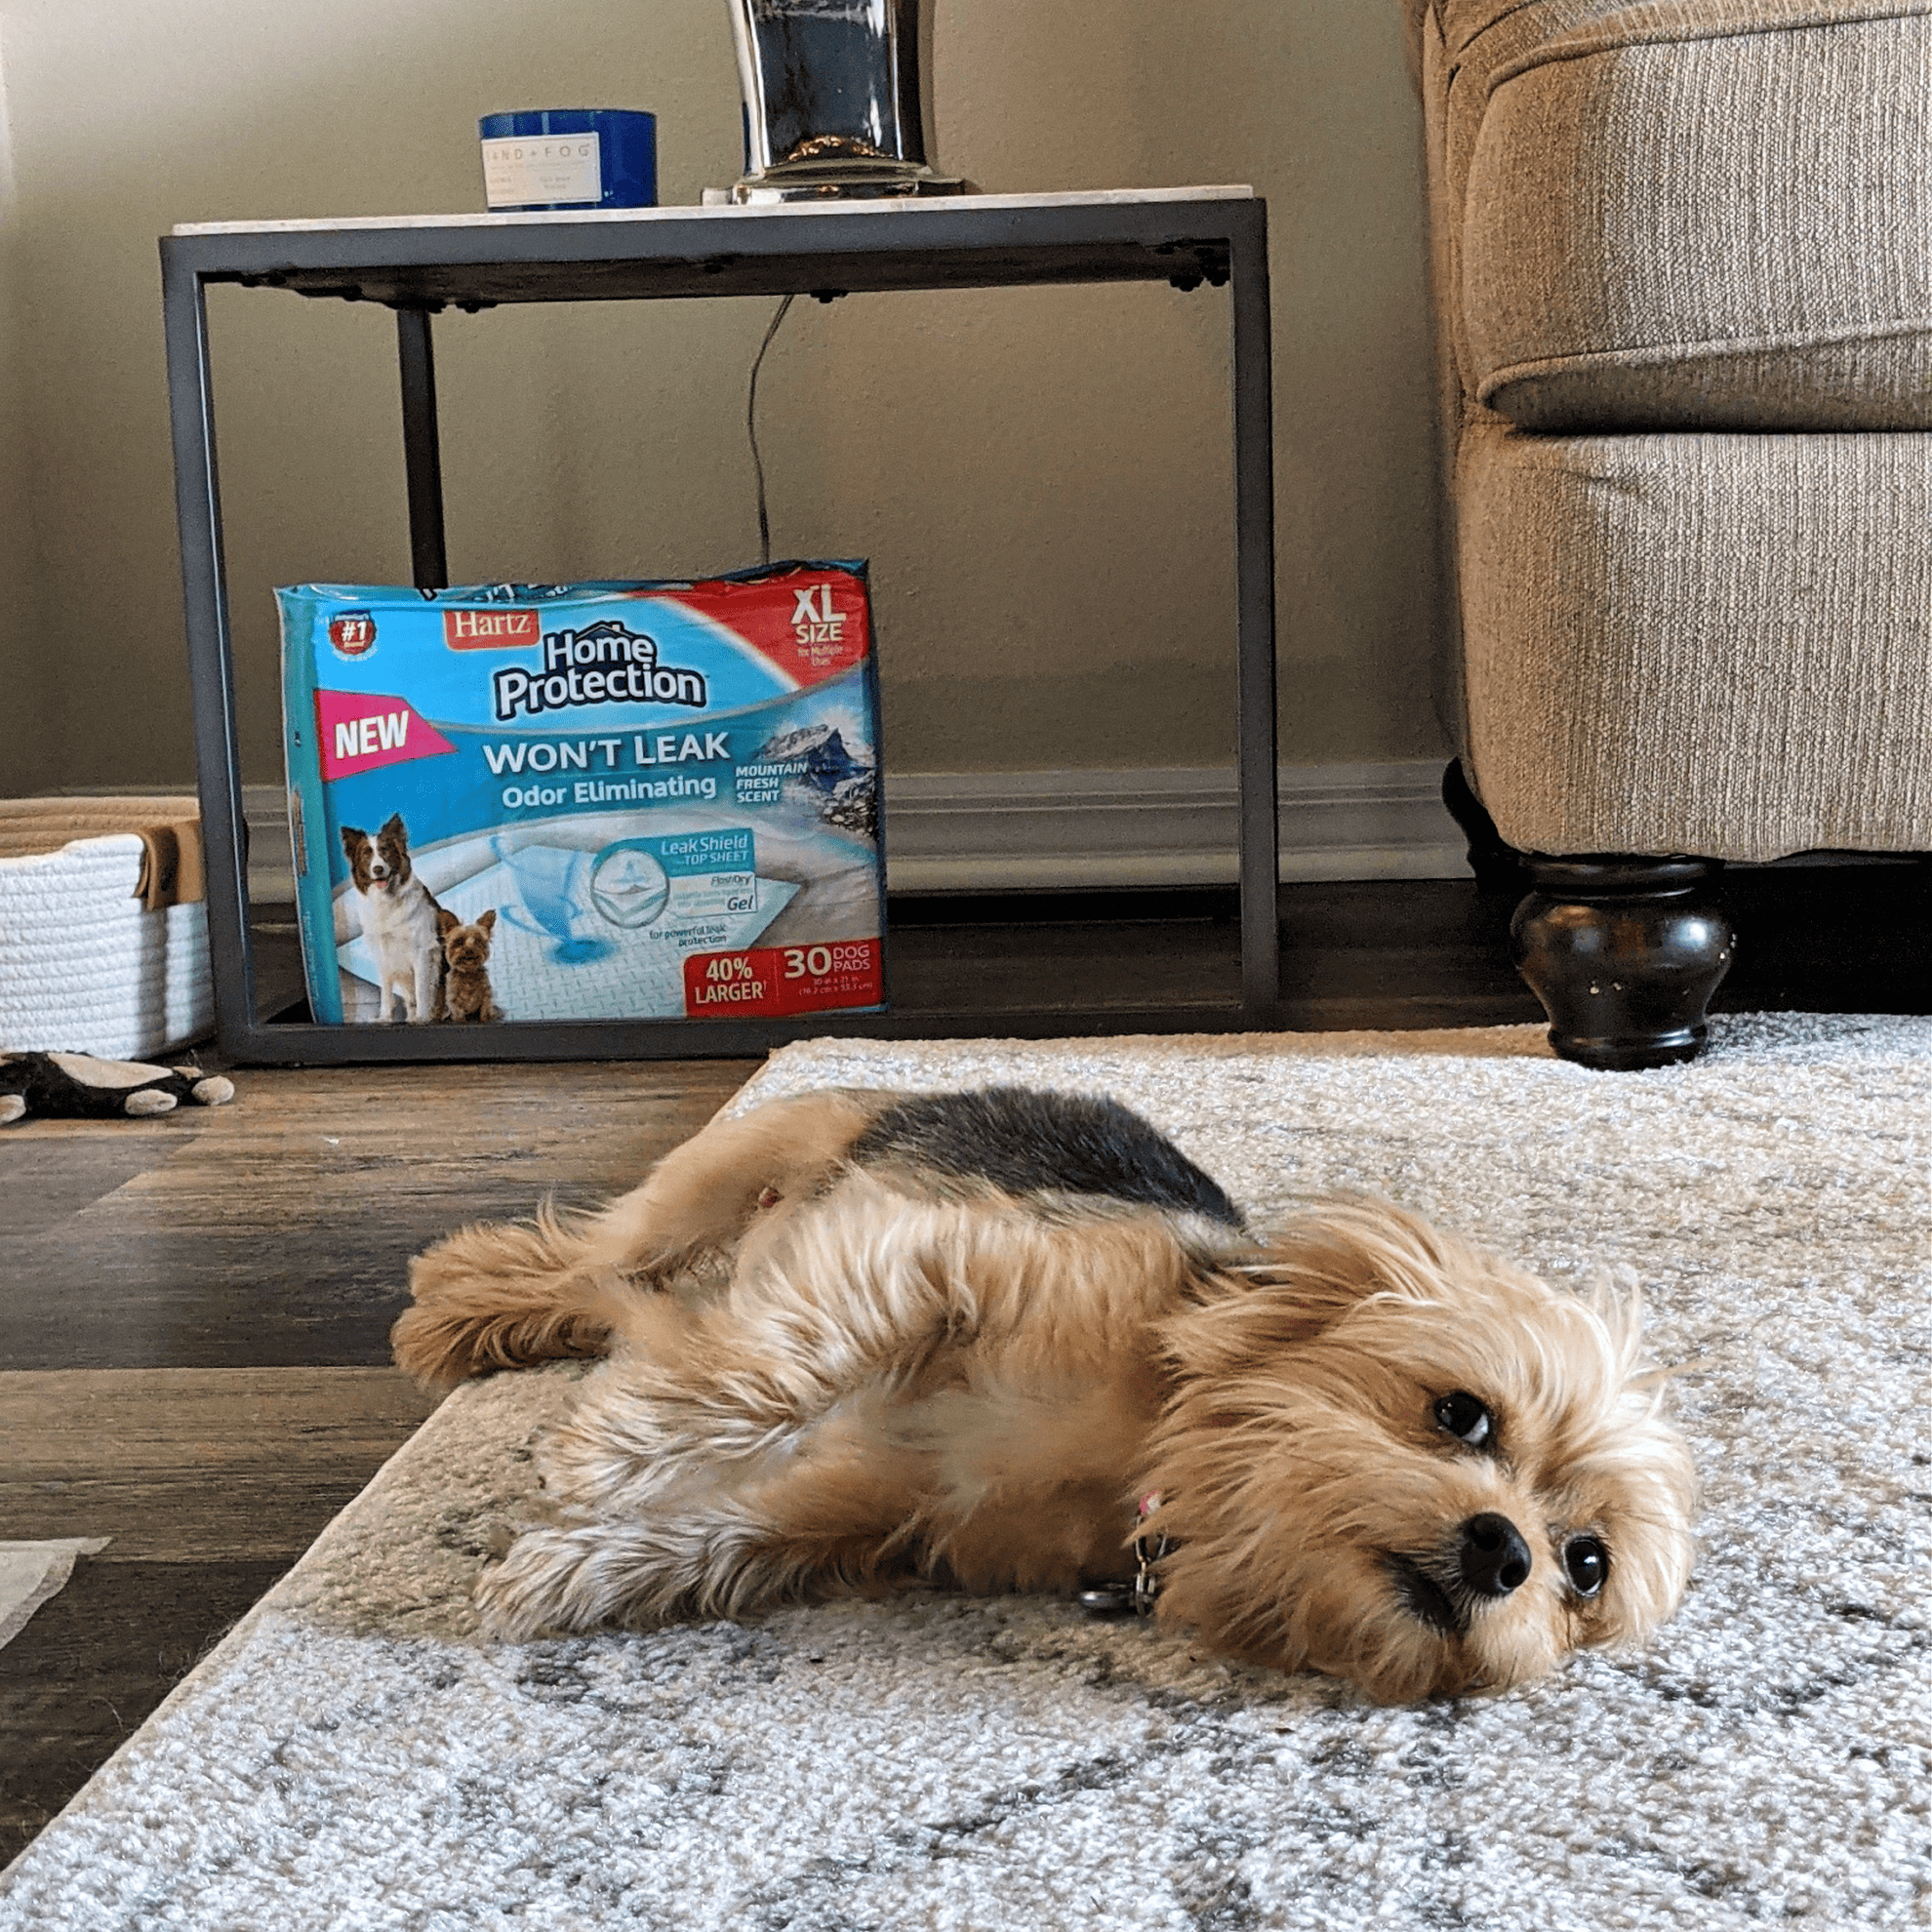 Hartz Home Protection Odor Eliminating Dog Pads provide superior leak proof and odor protection to help keep your home clean.